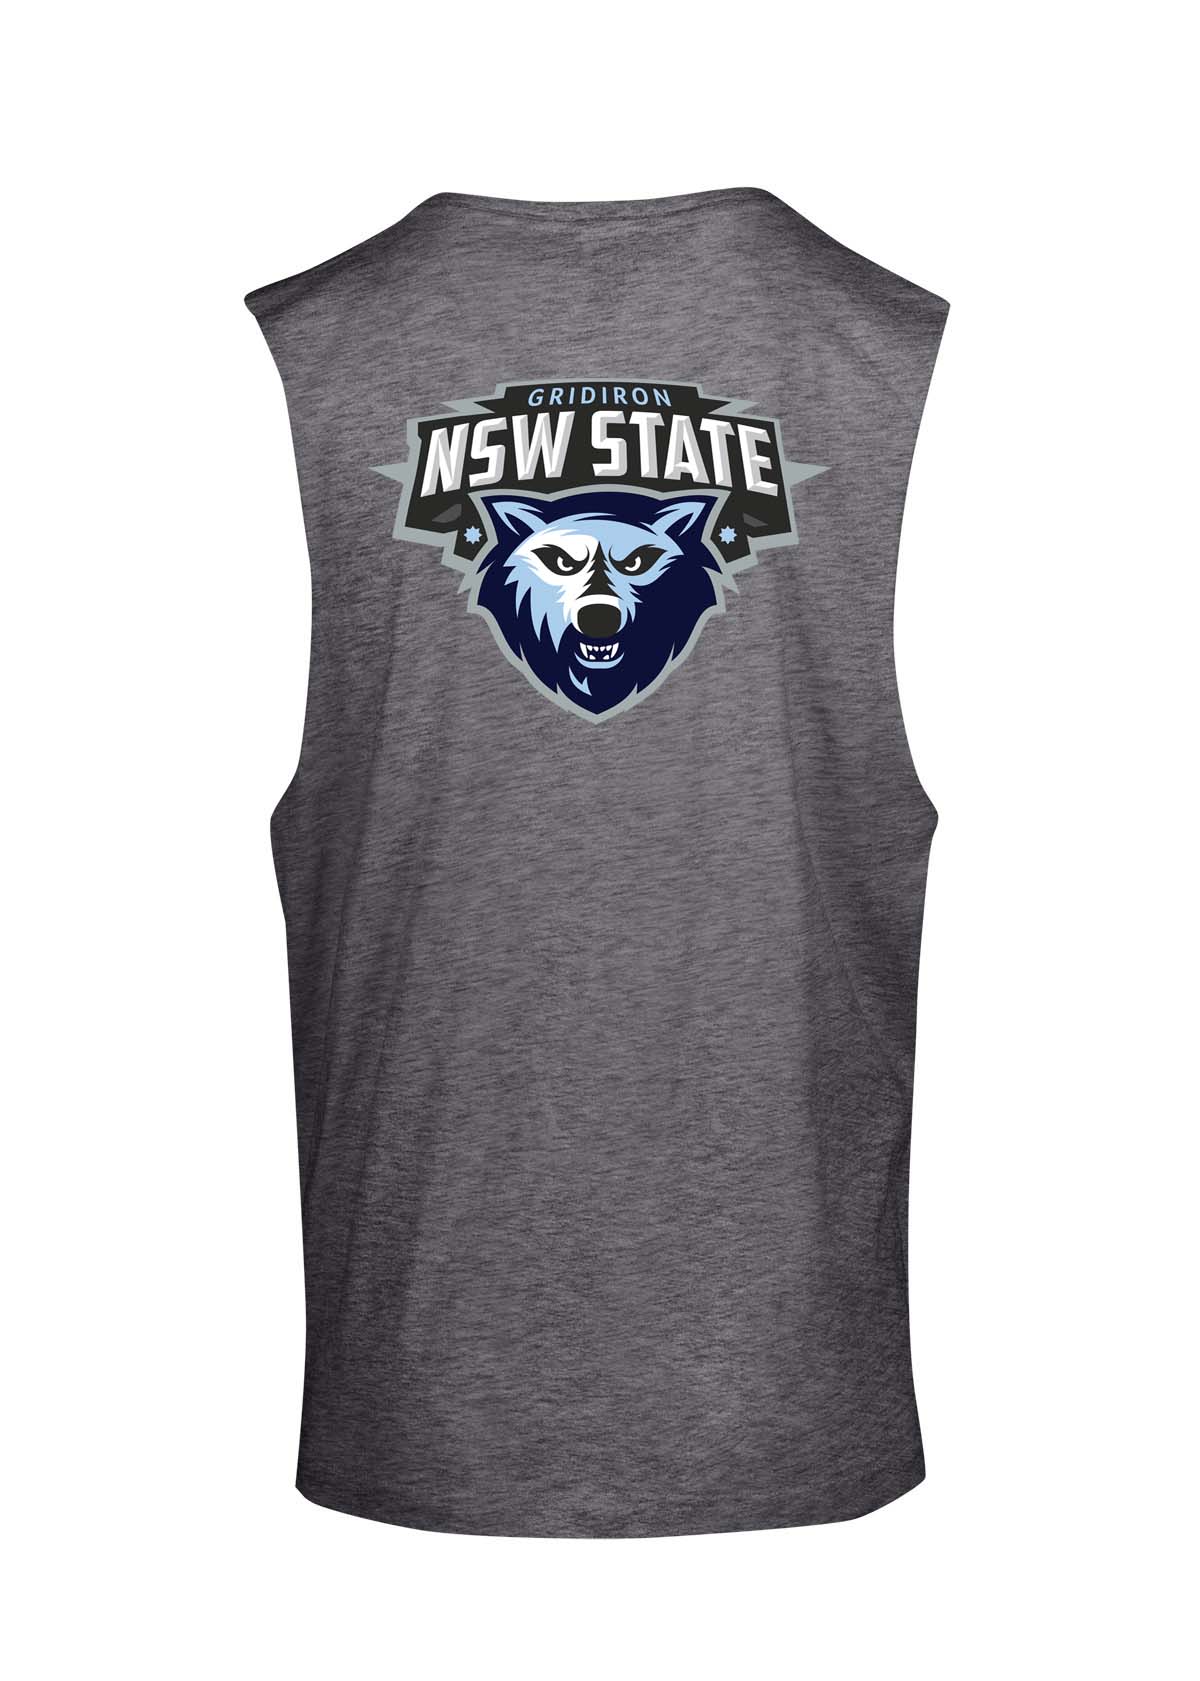 NSW MUSCLE TEE DOUBLE SIDED